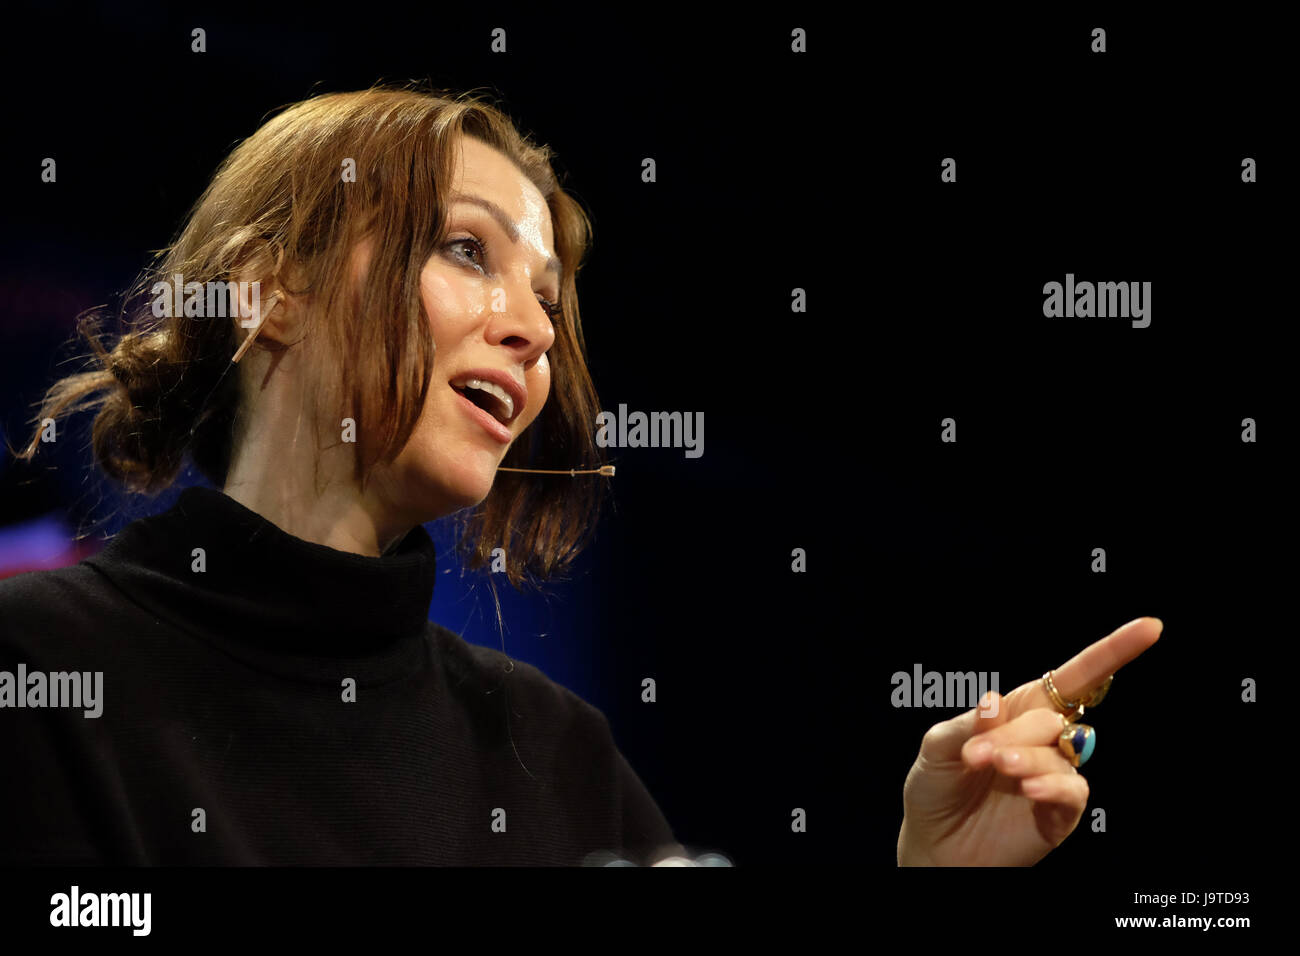 Hay Festival 2017 - Hay on Wye, Wales, UK - Saturday 3rd June 2017 - Turkish novelist Elif Shafak on stage at the Hay Festival discussing her latest novel Three Daughters of Eve - the Hay Festival celebrates its 30th anniversary in 2017 - the literary festival runs until Sunday June 4th.  Steven May / Alamy Live News Stock Photo